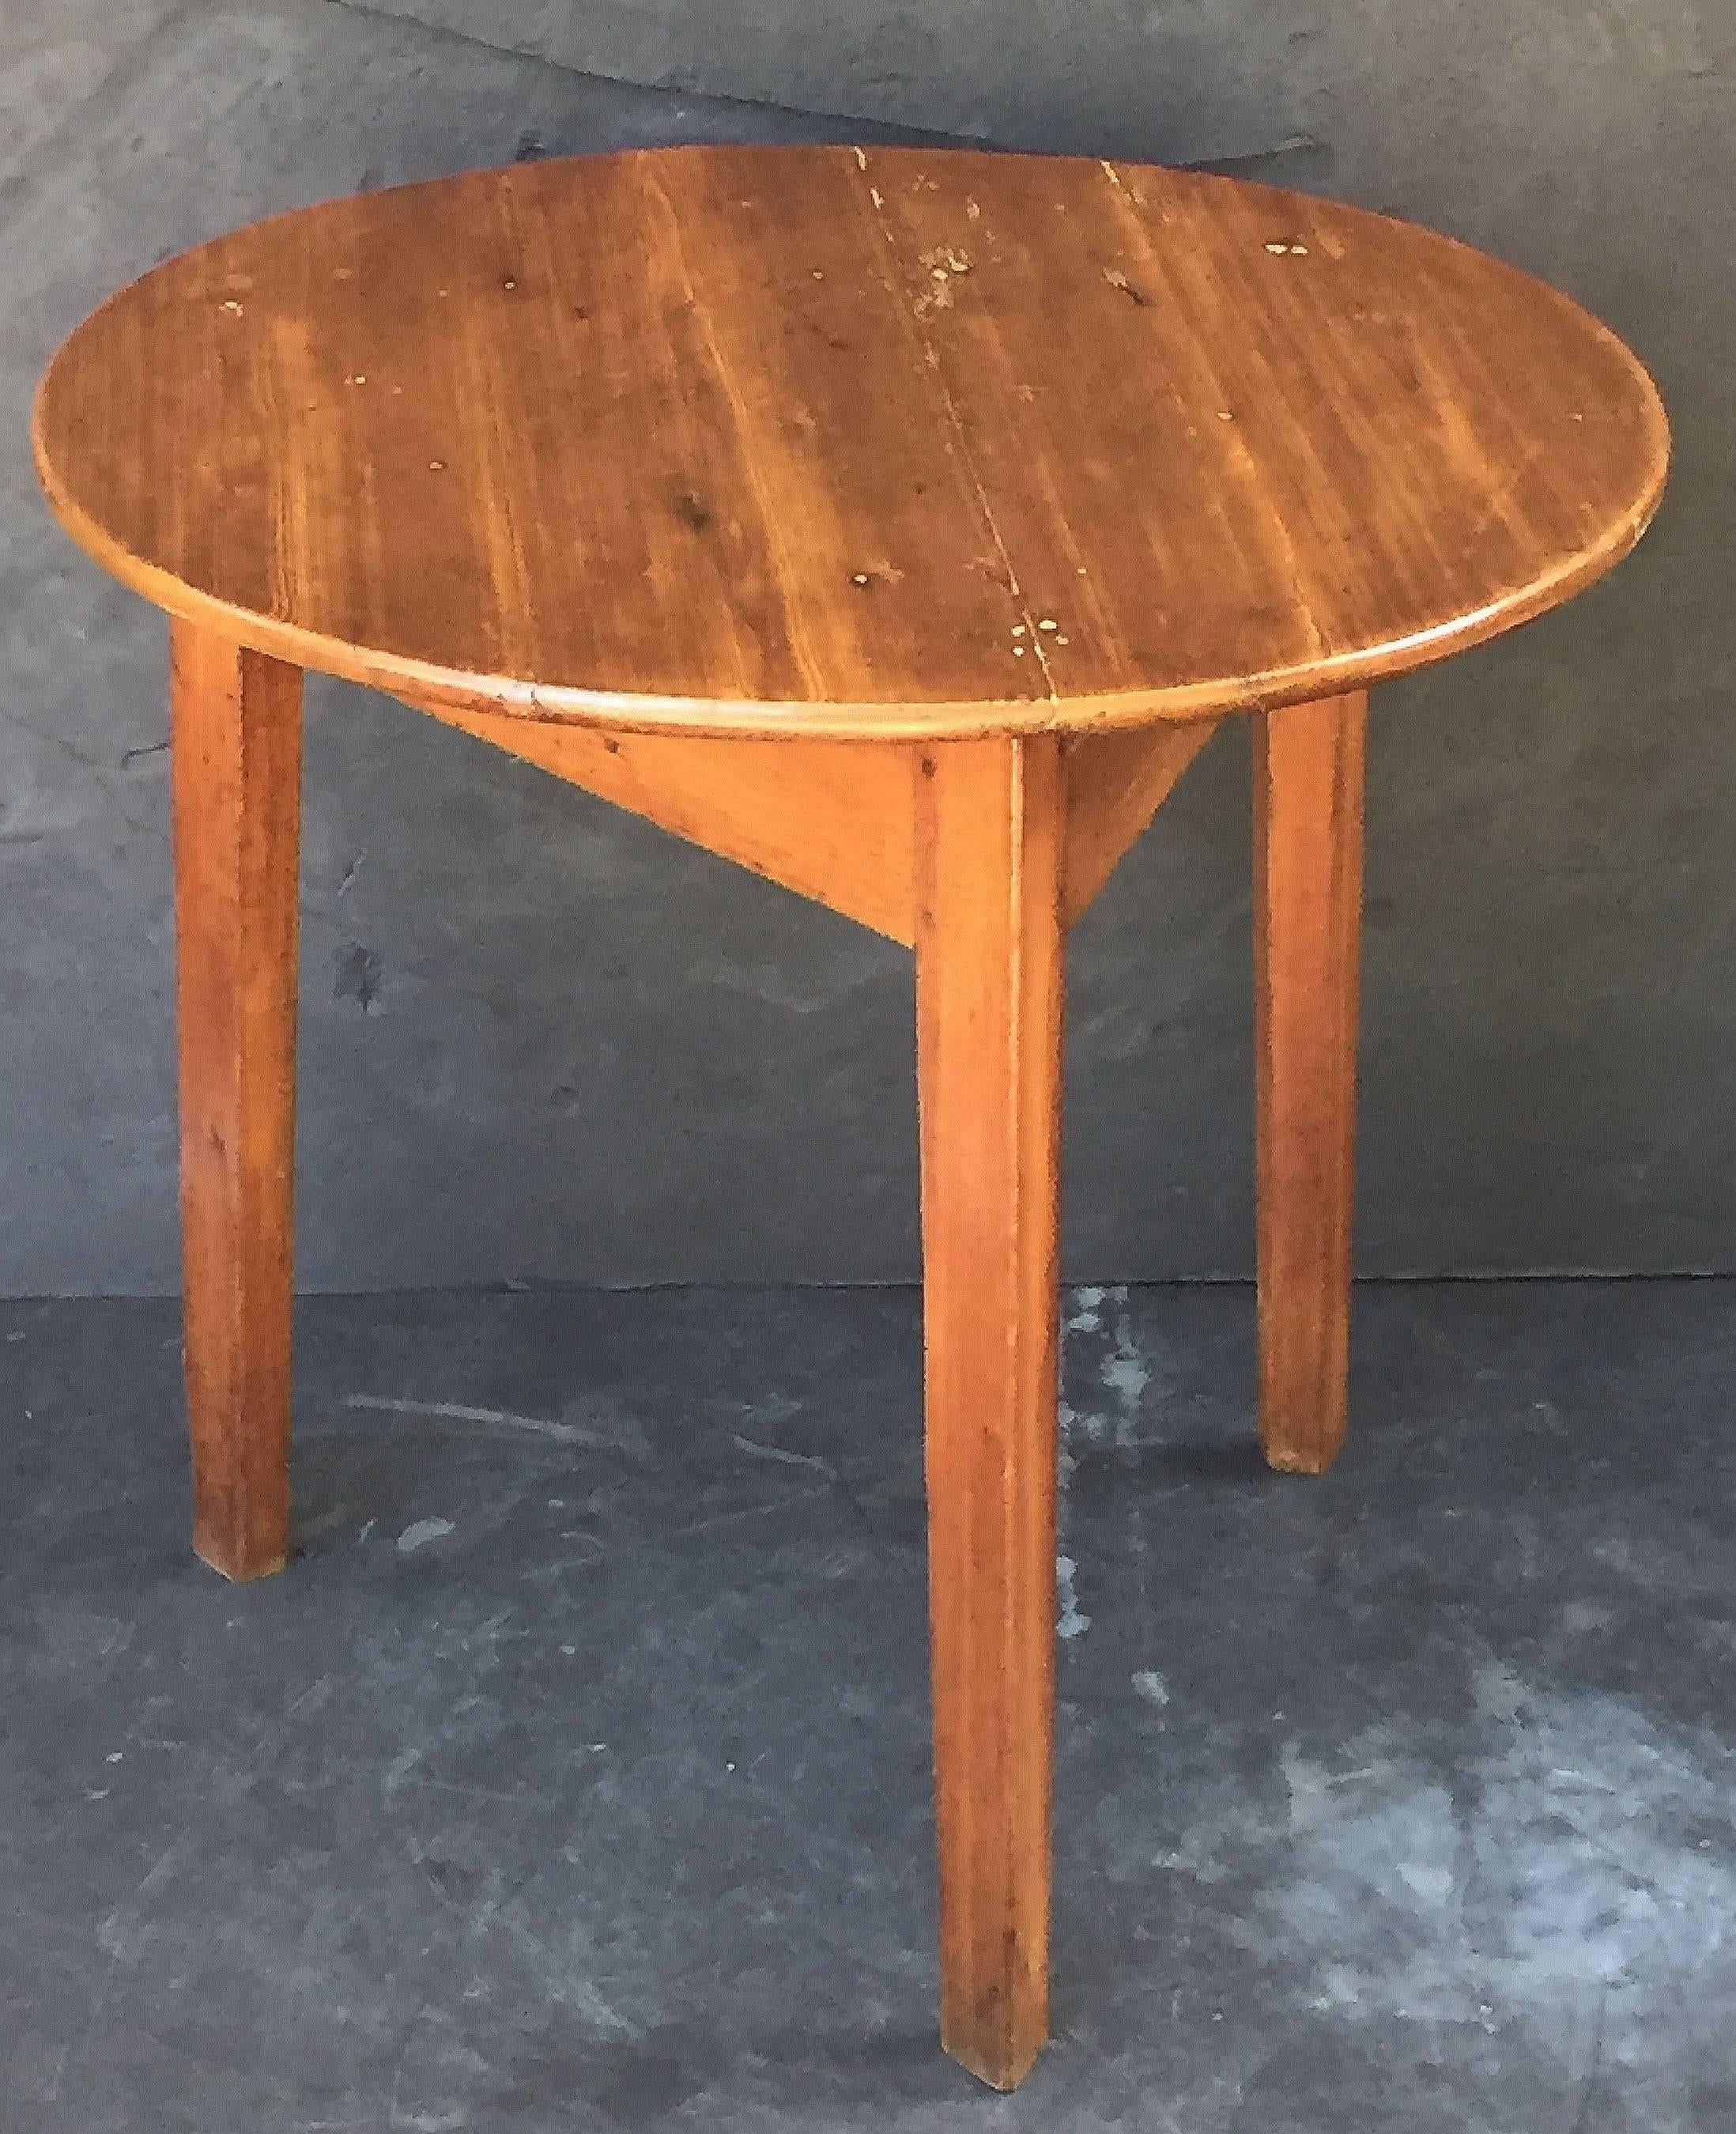 A fine English cricket table or occasional table of pine from the 19th century, featuring the traditional round or circular top over a tripod leg base.

Makes a nice occasional table or side table.